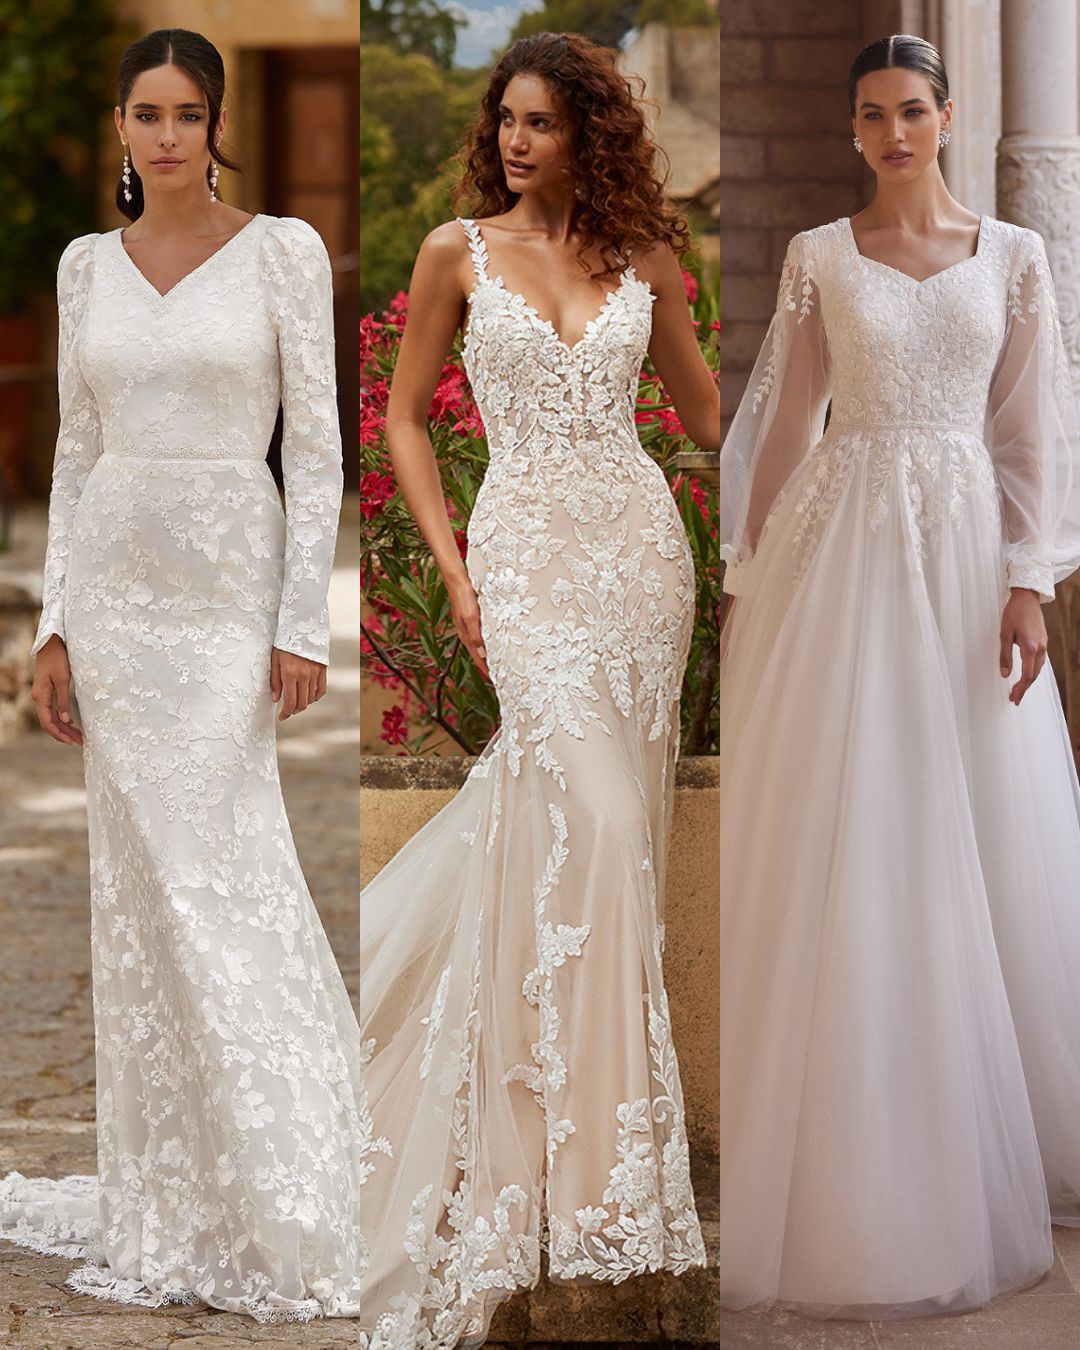 A collage photo of three women posing in different lace wedding gowns. 